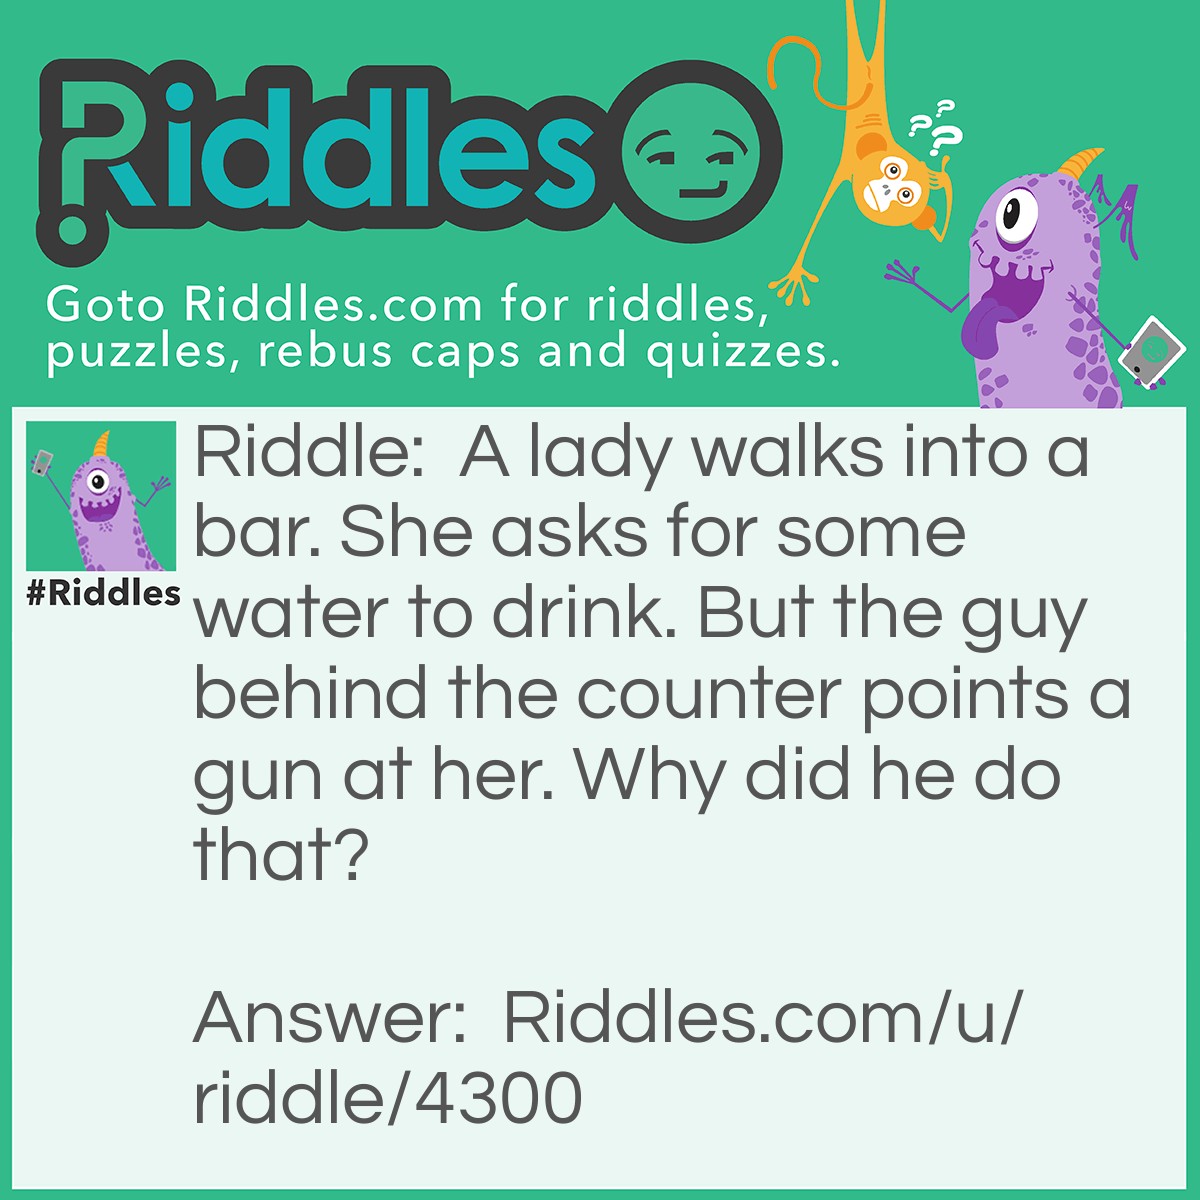 Riddle: A lady walks into a bar. She asks for some water to drink. But the guy behind the counter points a gun at her. Why did he do that? Answer: She had the hiccups and the gun scared her and took away her hiccups.